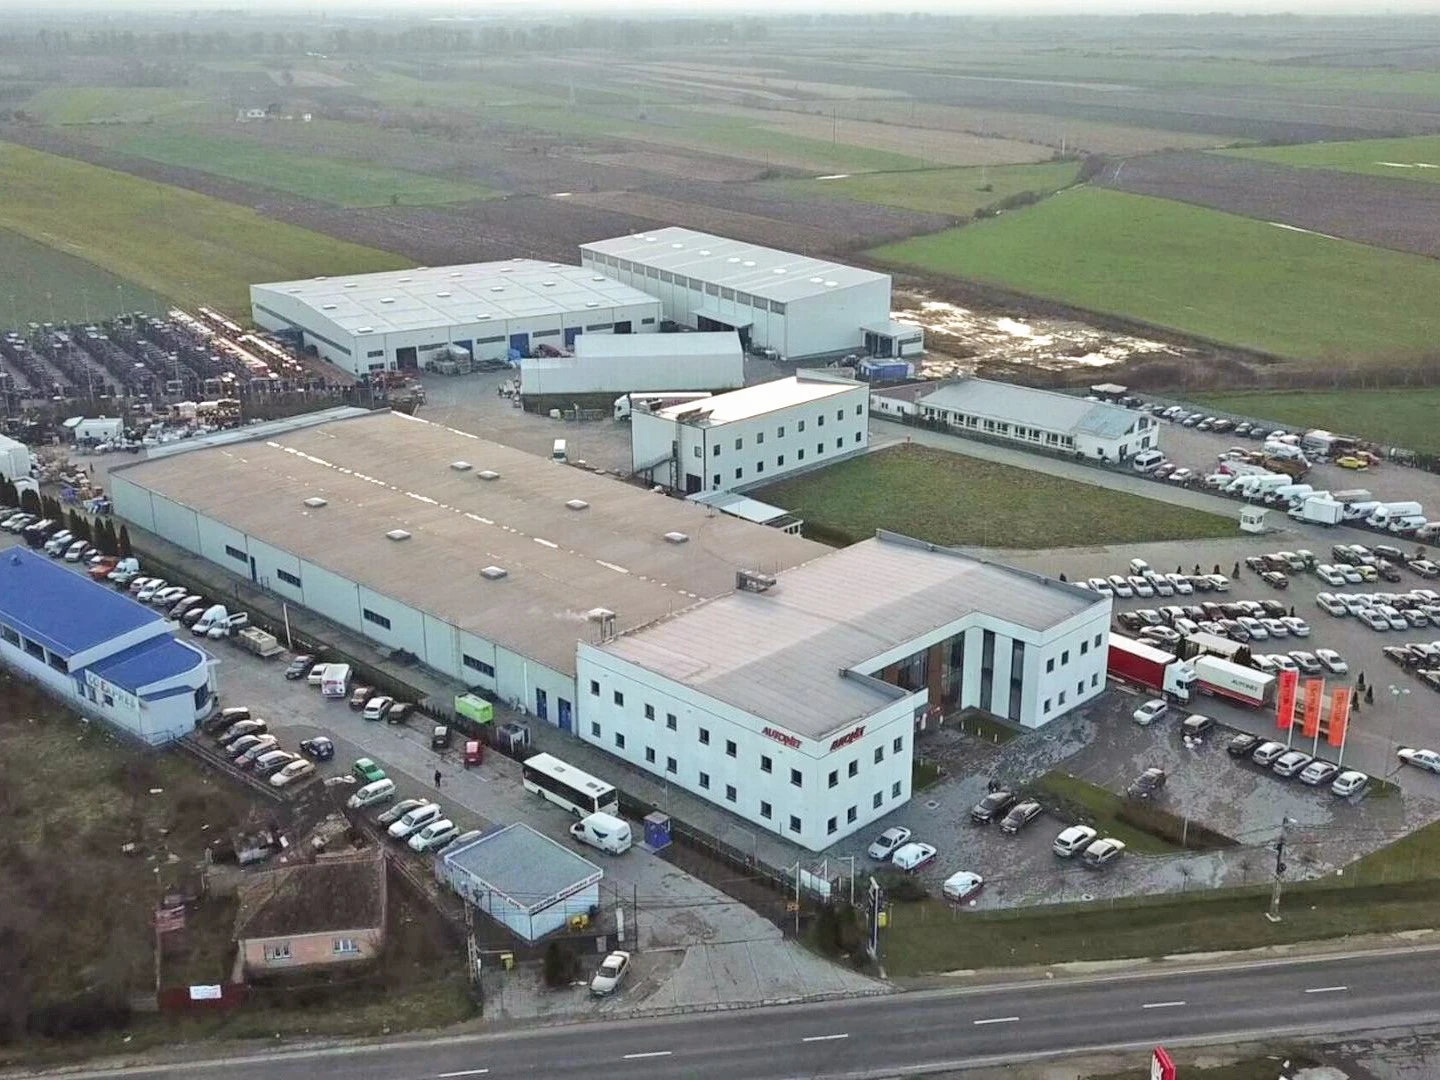 The Largest Supplier of Auto Materials in Romania, Autonet Group, Opted for AxxonSoft’s Logistics Remote Video Surveillance